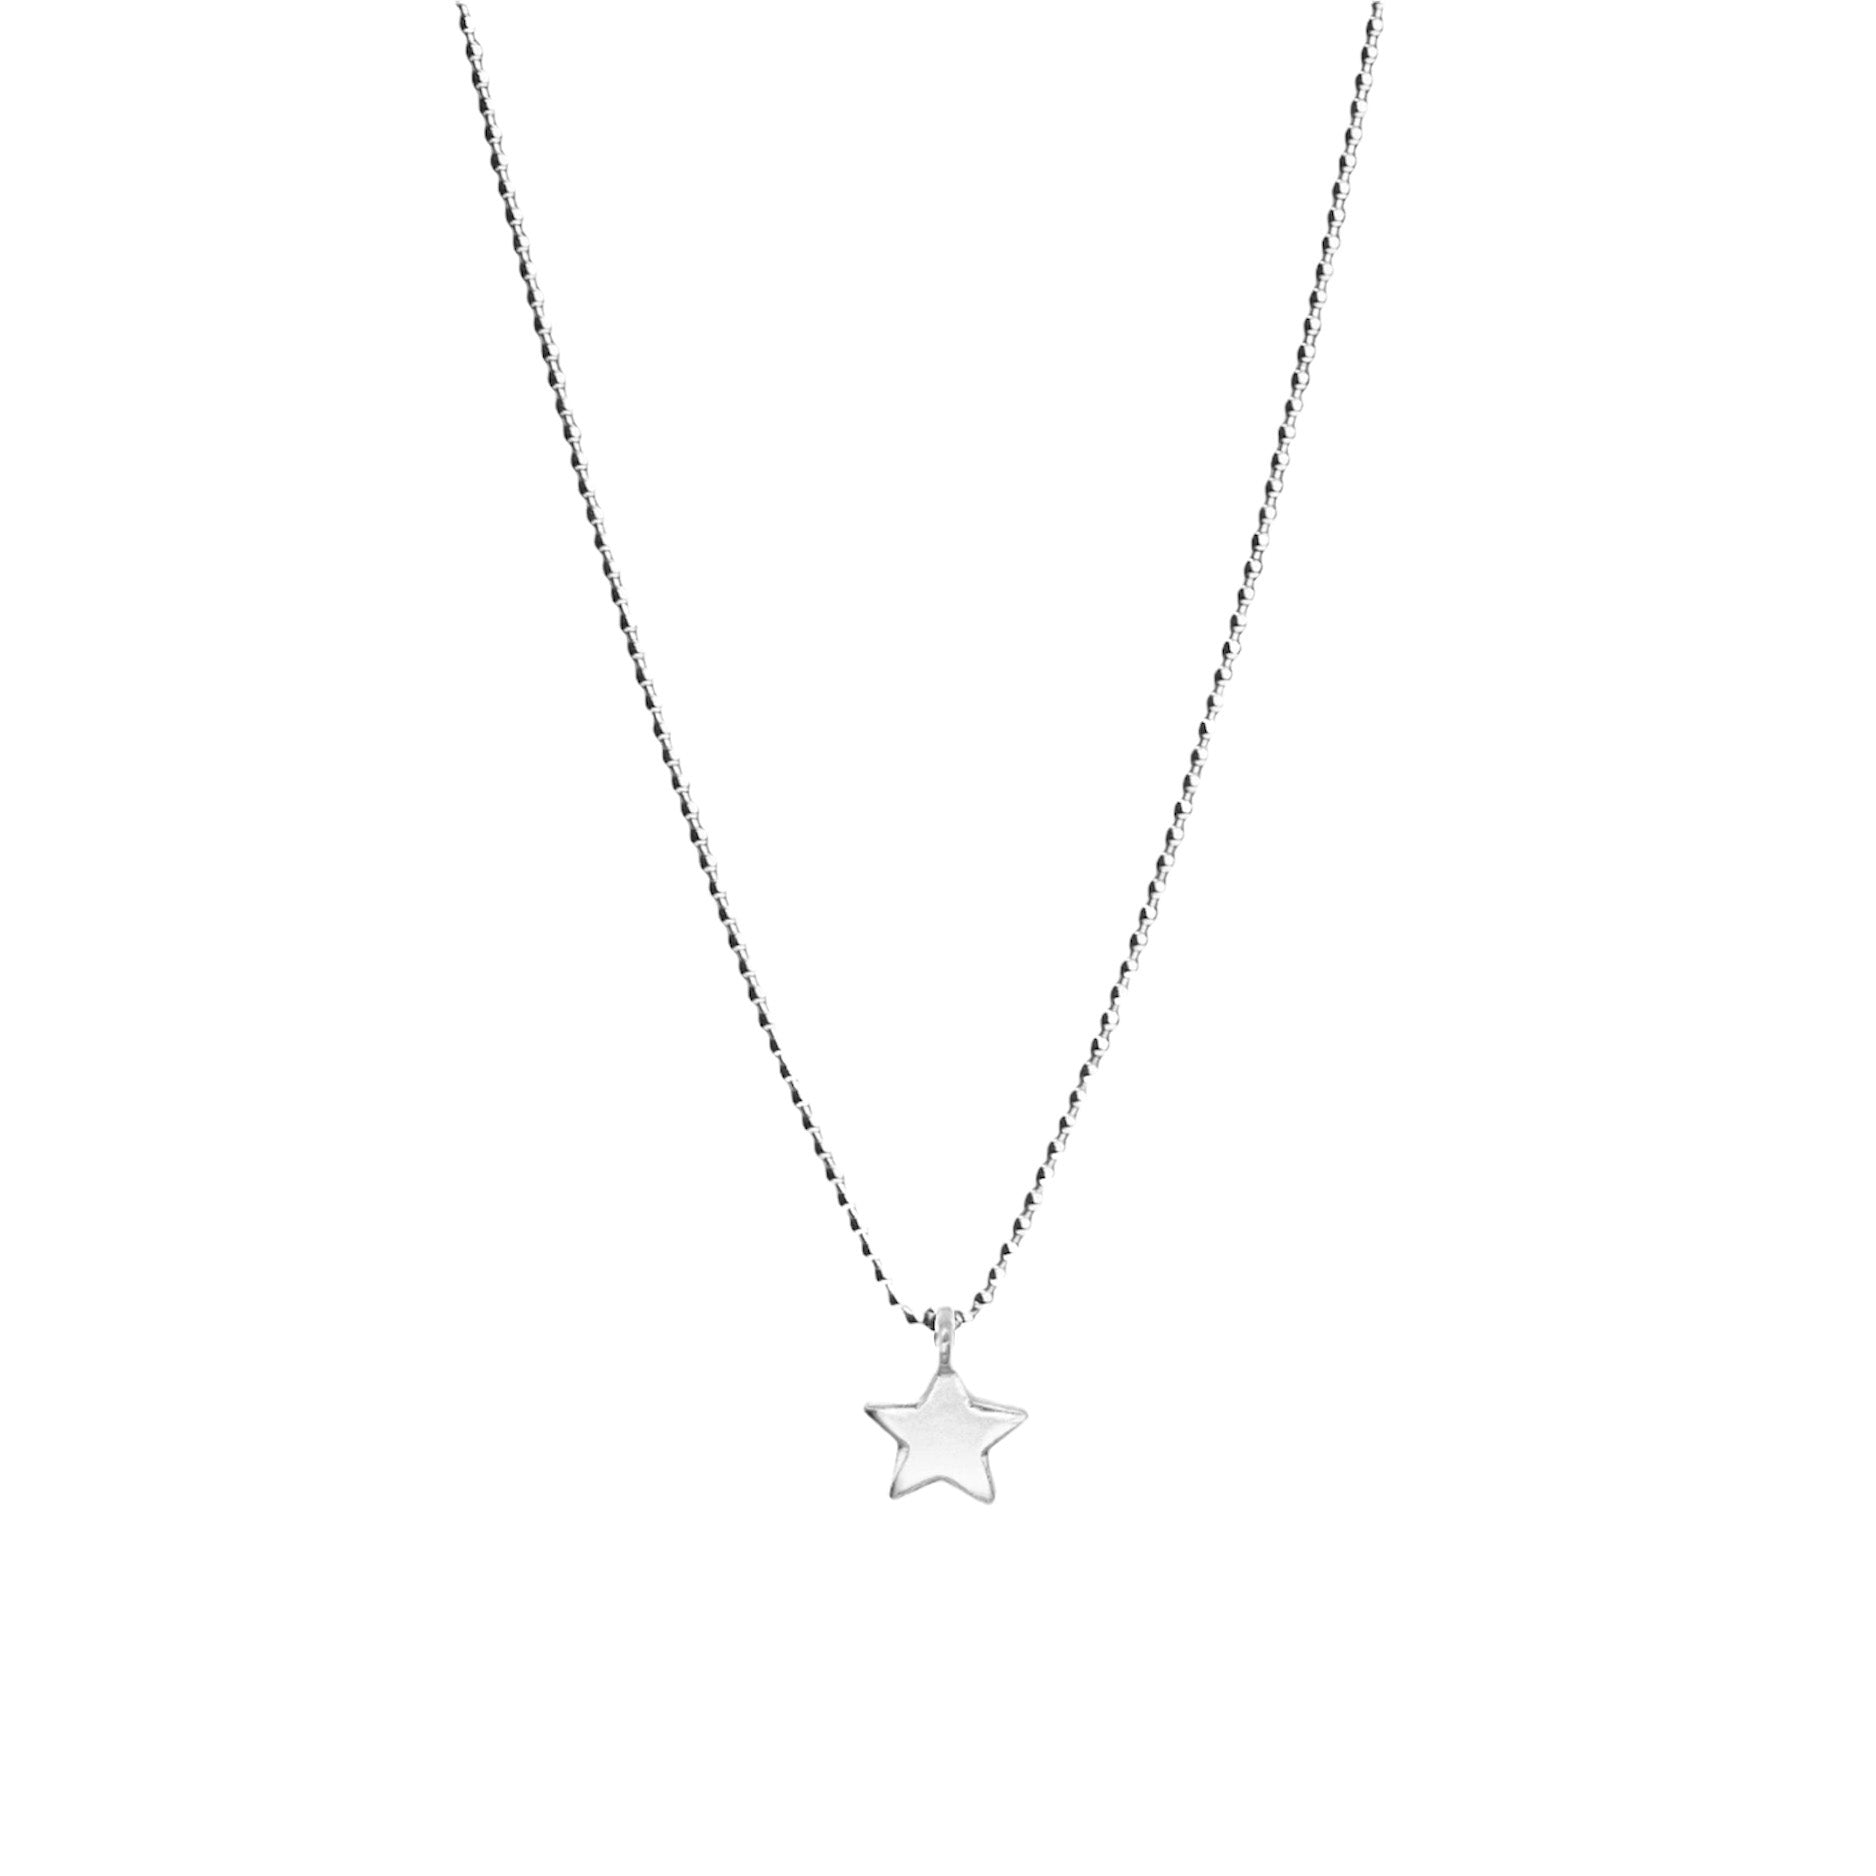 Belle & Bee Sterling Silver Chunky Star Ball chain necklace